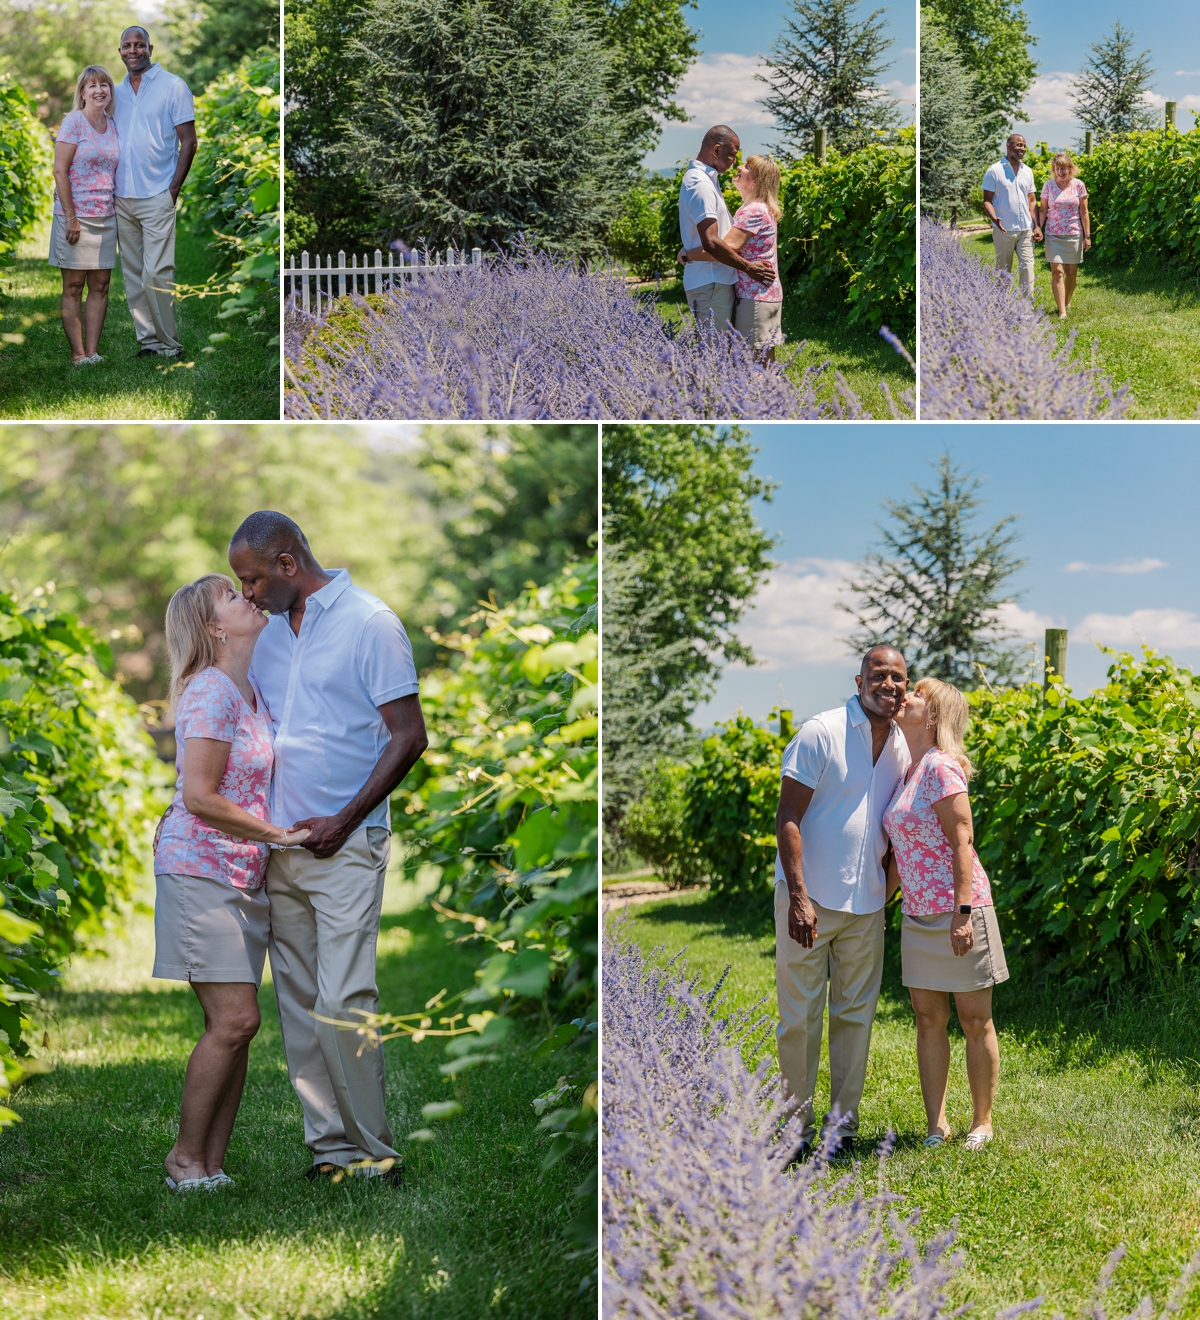 Antonio and Peggy walking through the lavender patches and being close together, hugging and kissing; captured by their engagement photographer